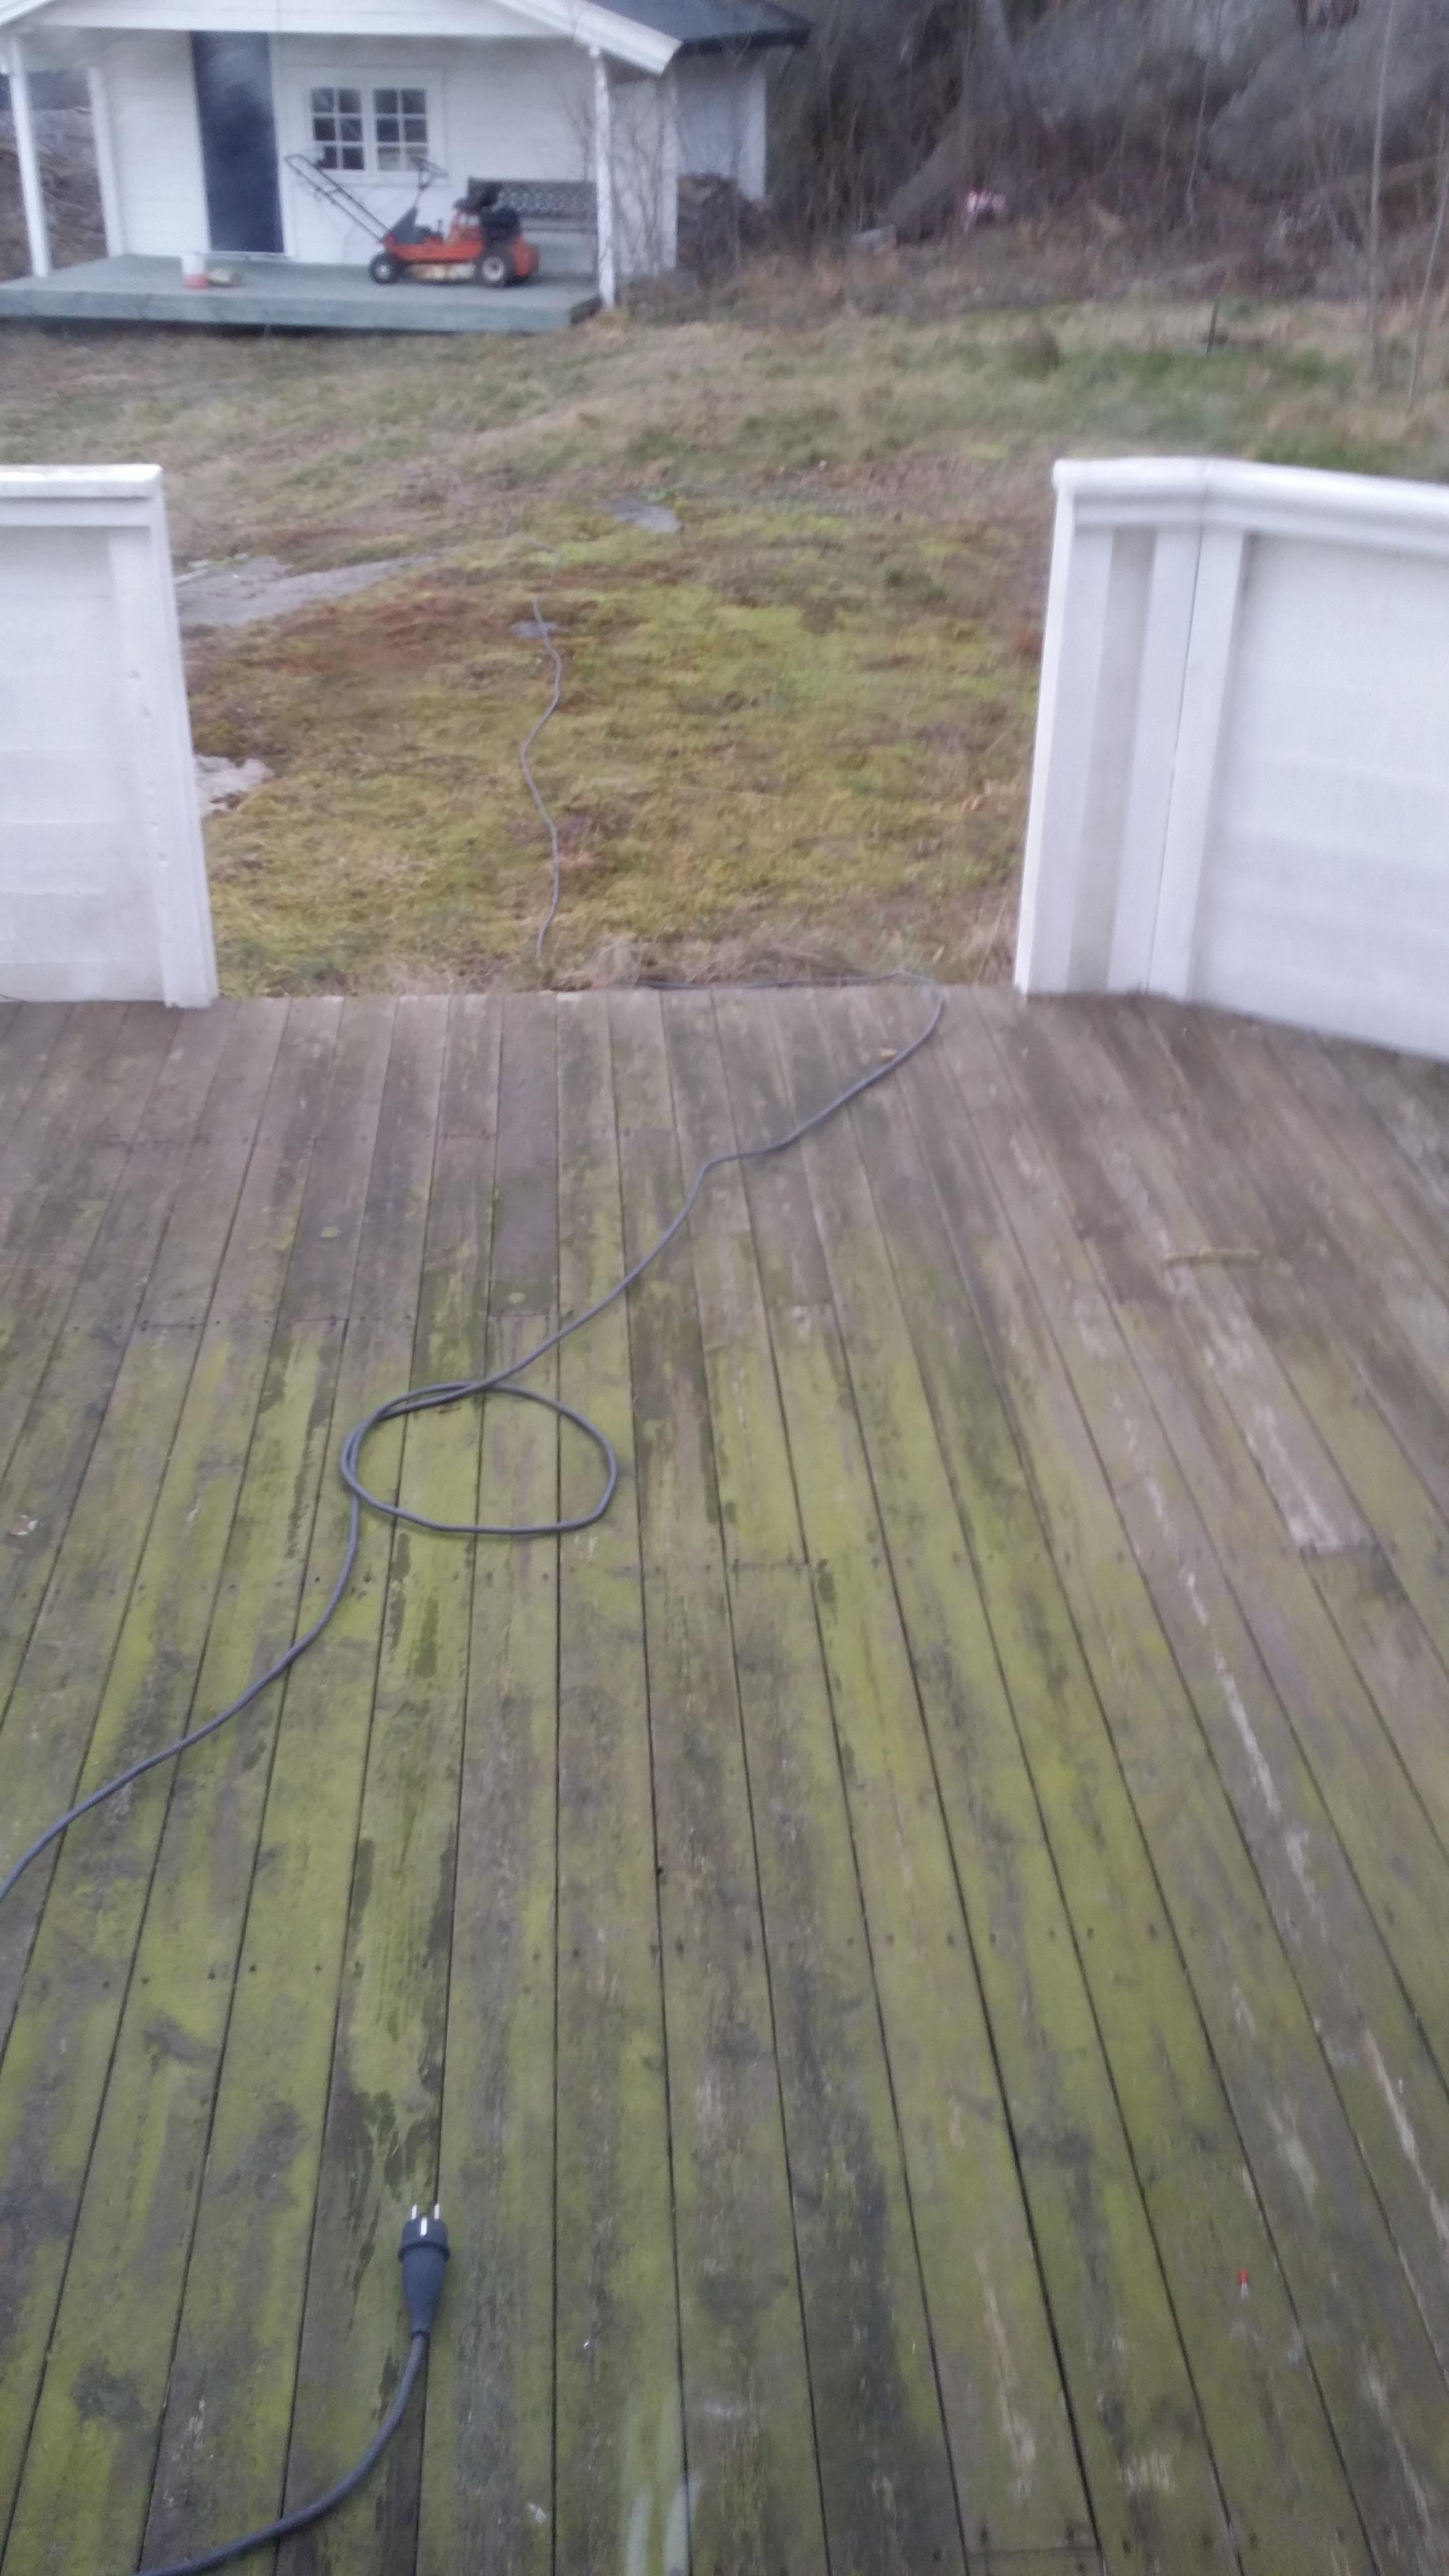 Is this green stuff that grows on the deck bad? - Imgur